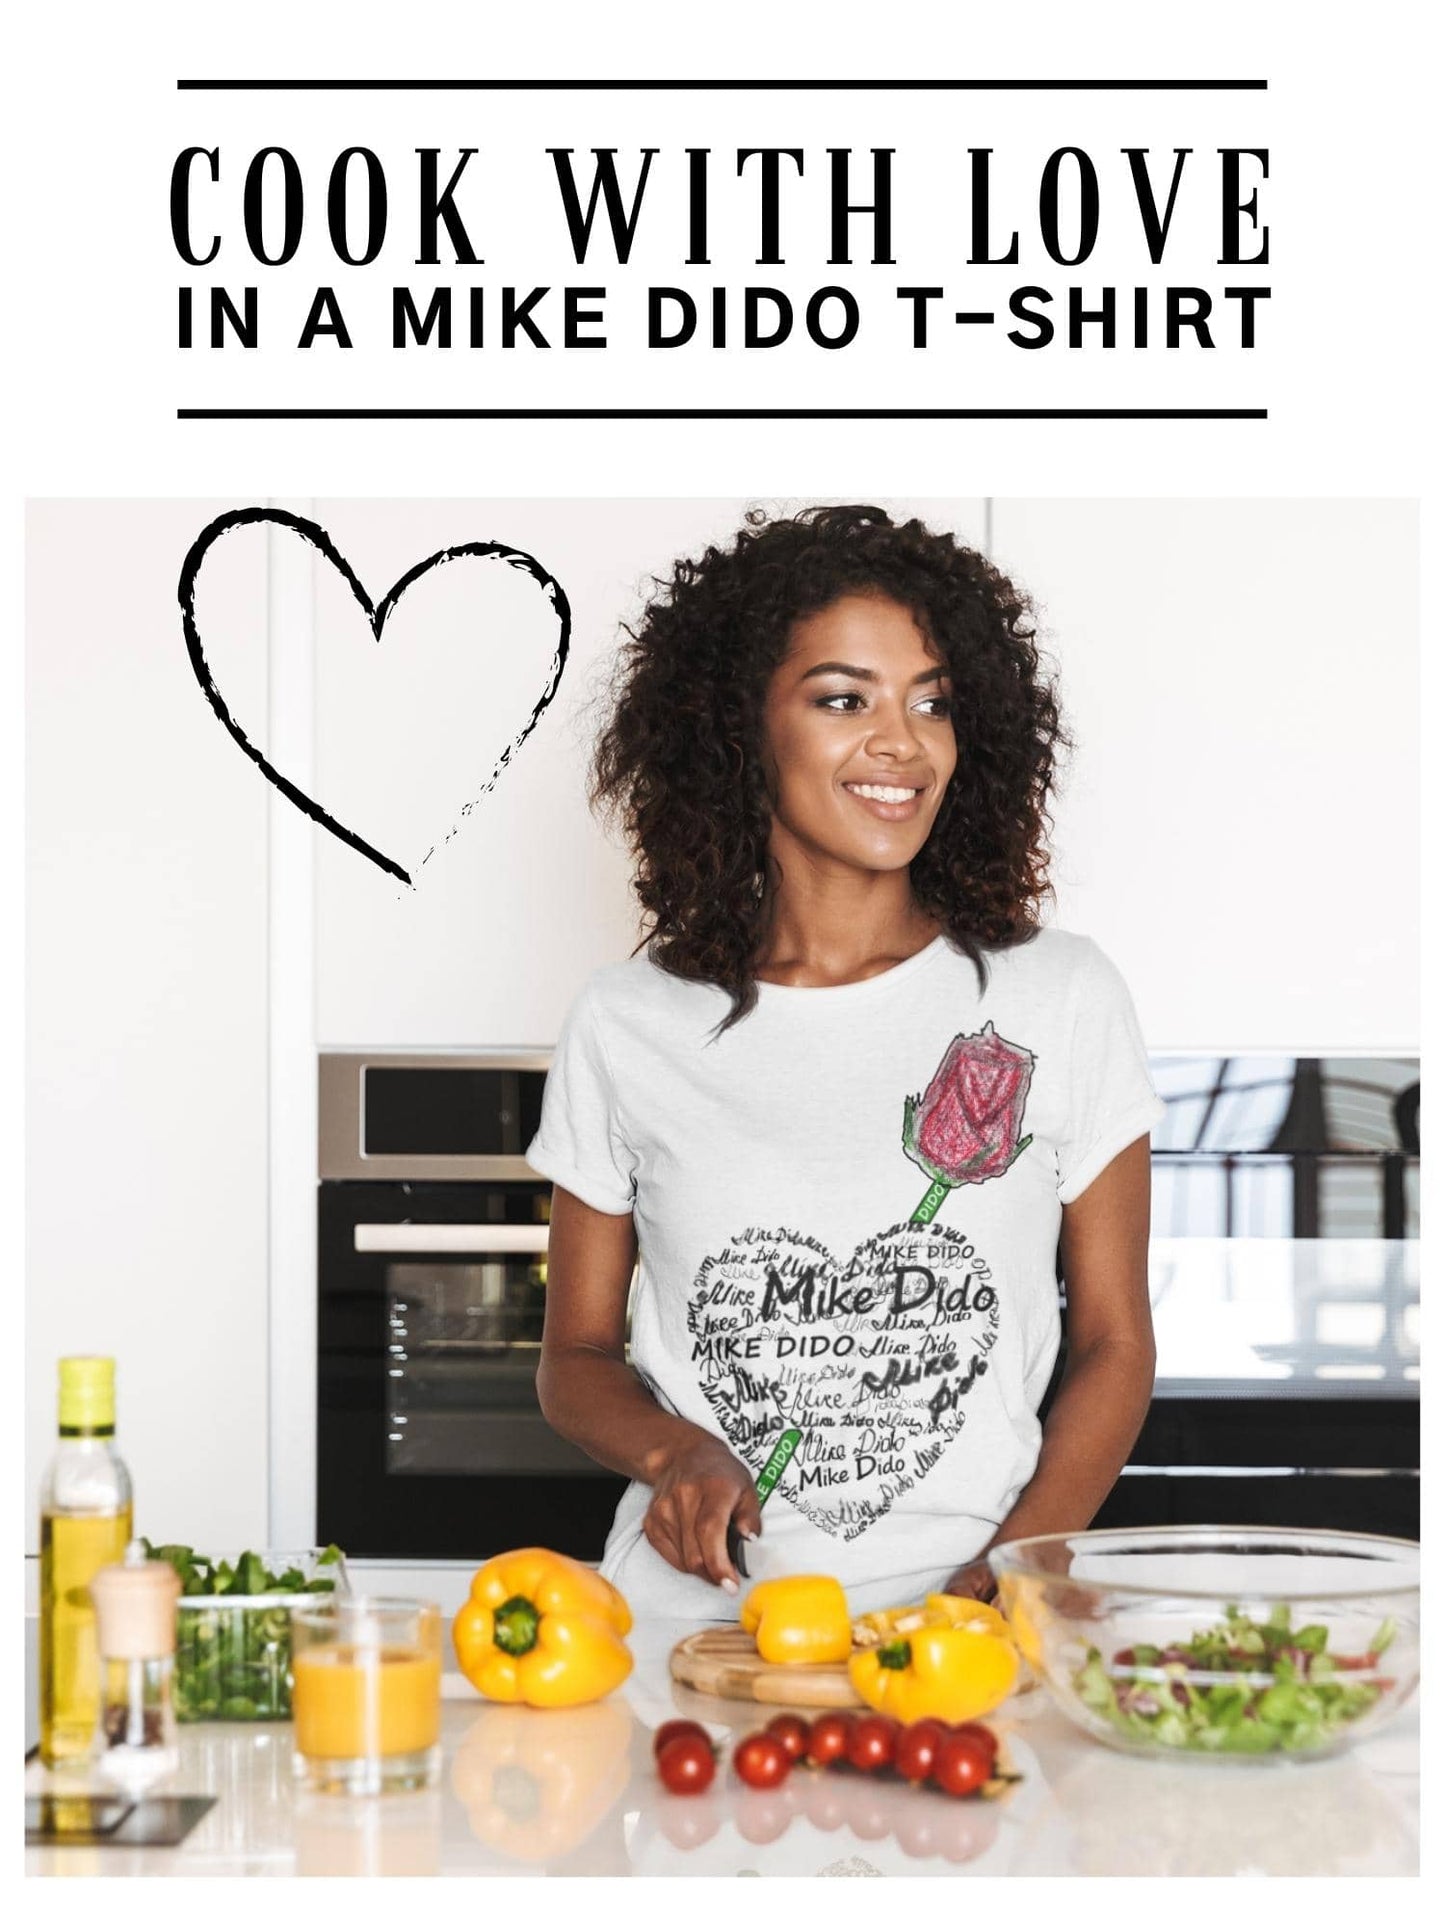 Logo T Shirt Heart Rose by Mike Dido